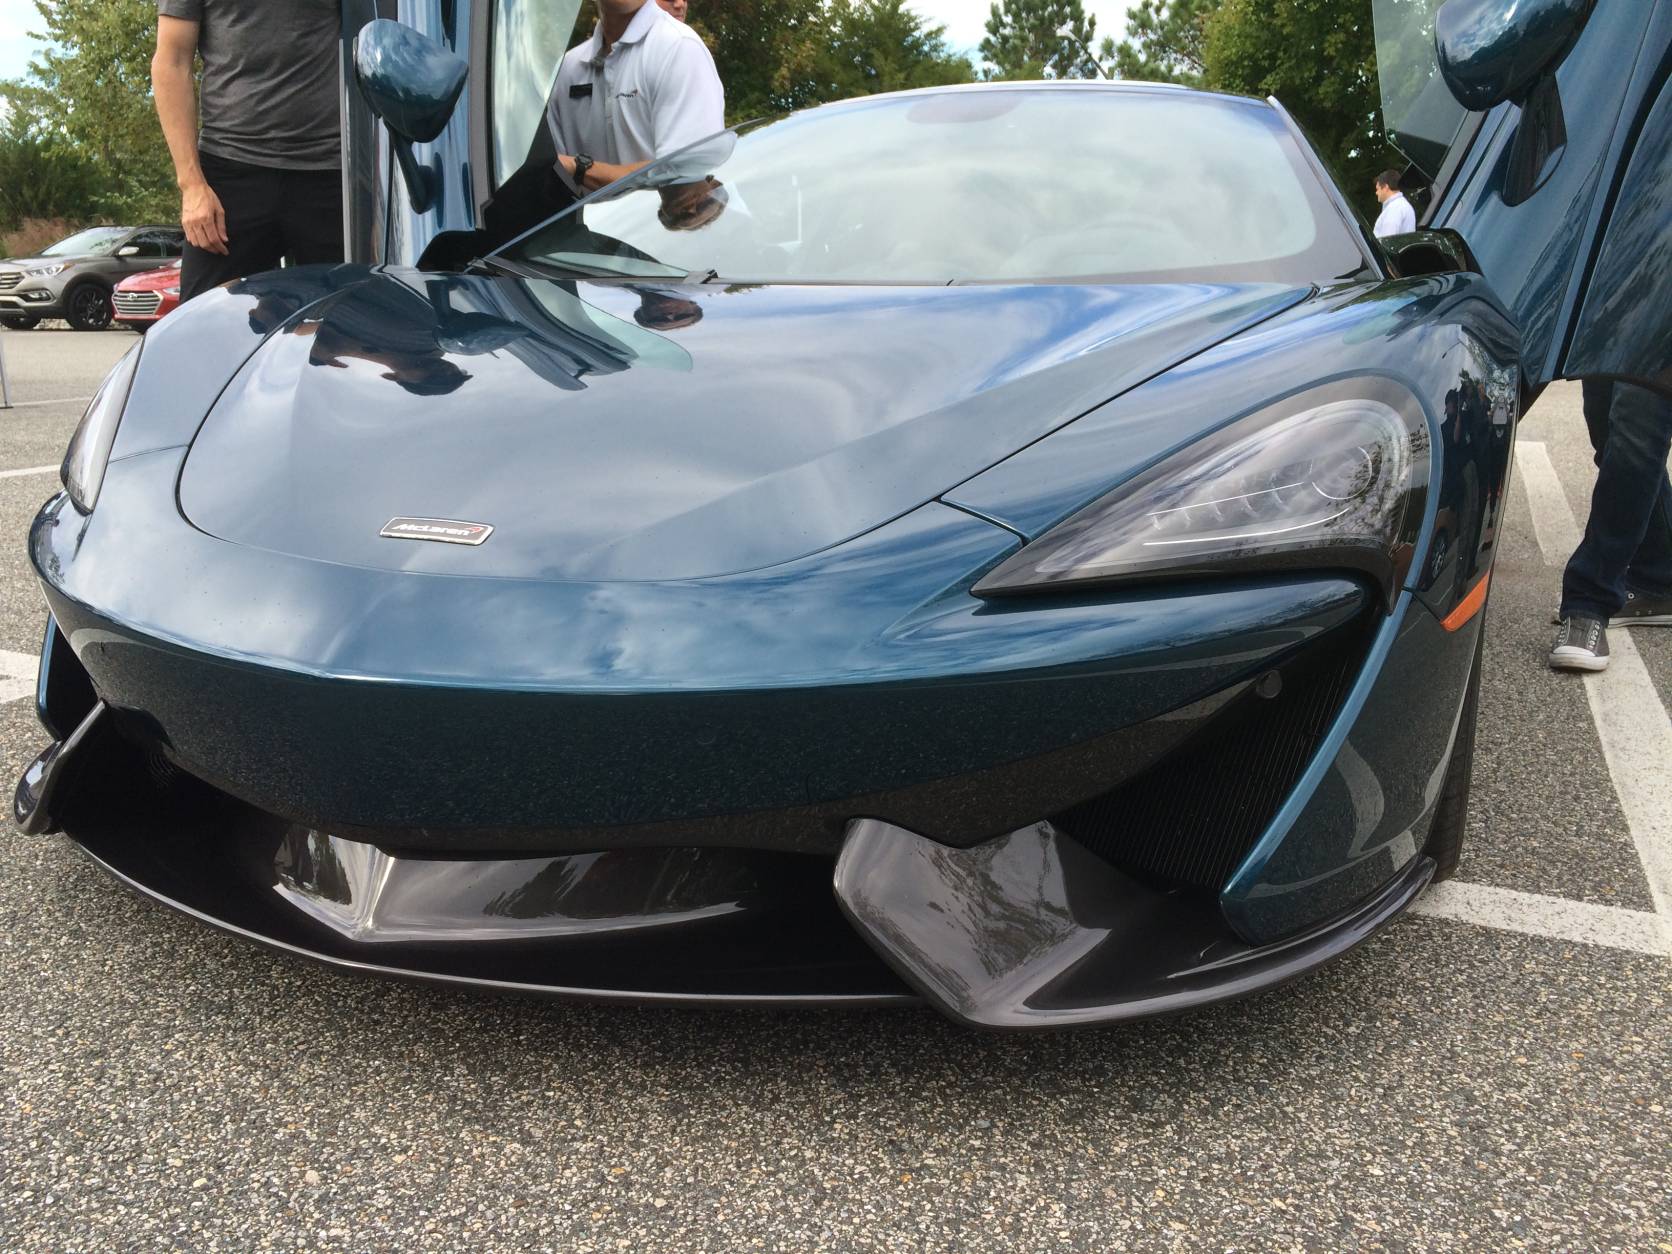 The McLaren 570S fills the exotic car mantra by having a door that swings up instead of opening normally, and there is a bit of a step over the wider sill to slide in this low riding car. (WTOP/Mike Parris)